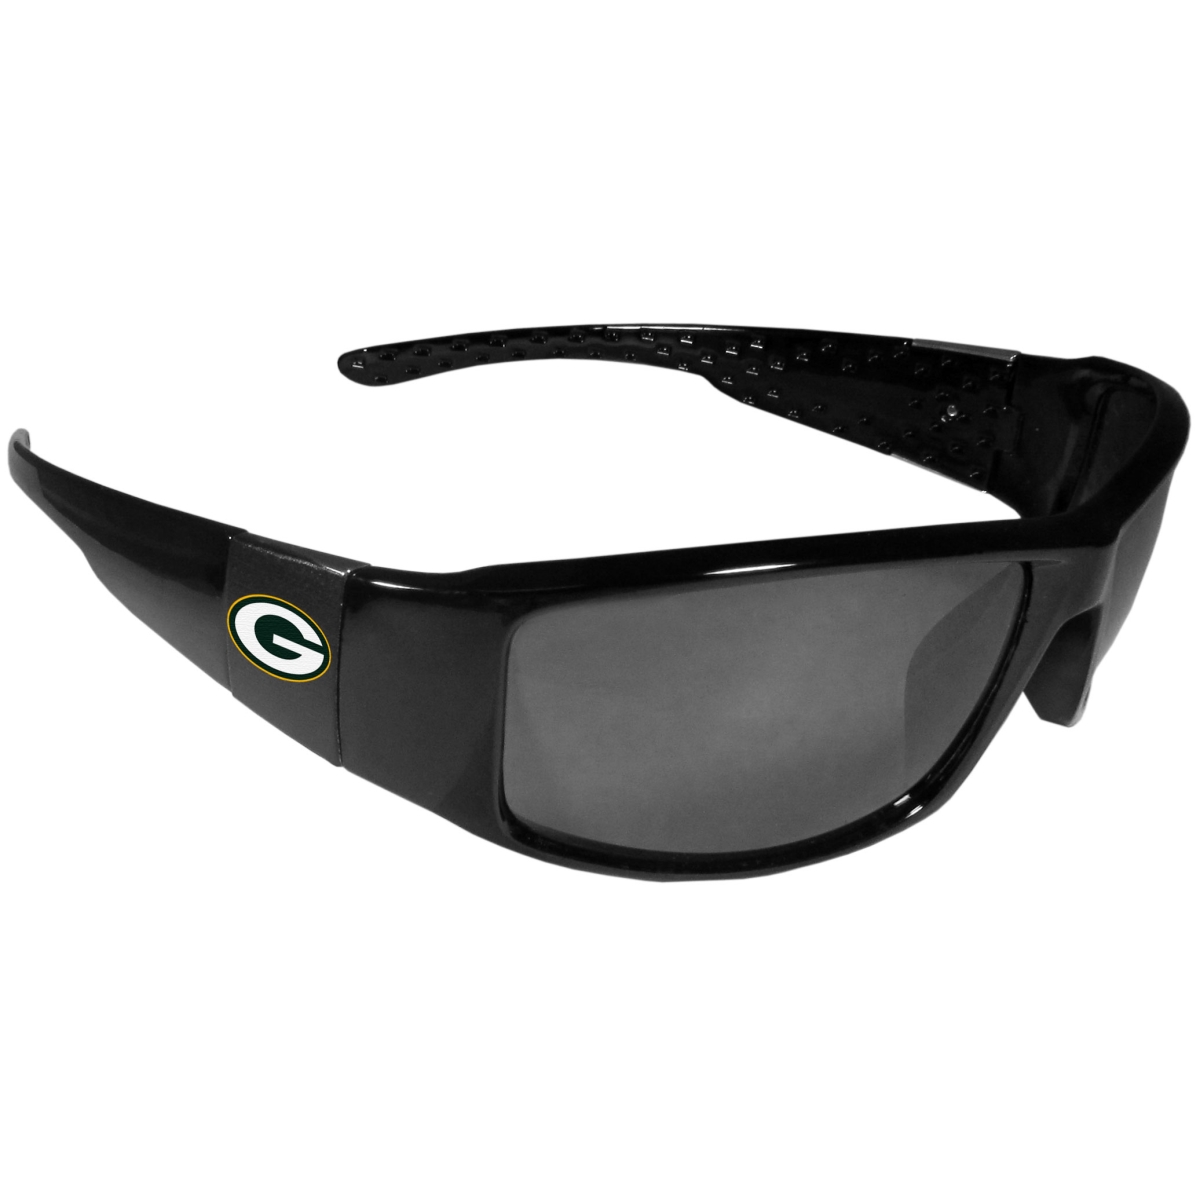 Picture of Siskiyou 2FCB115 Unisex NFL Green Bay Packers Black Wrap Sunglasses - One Size